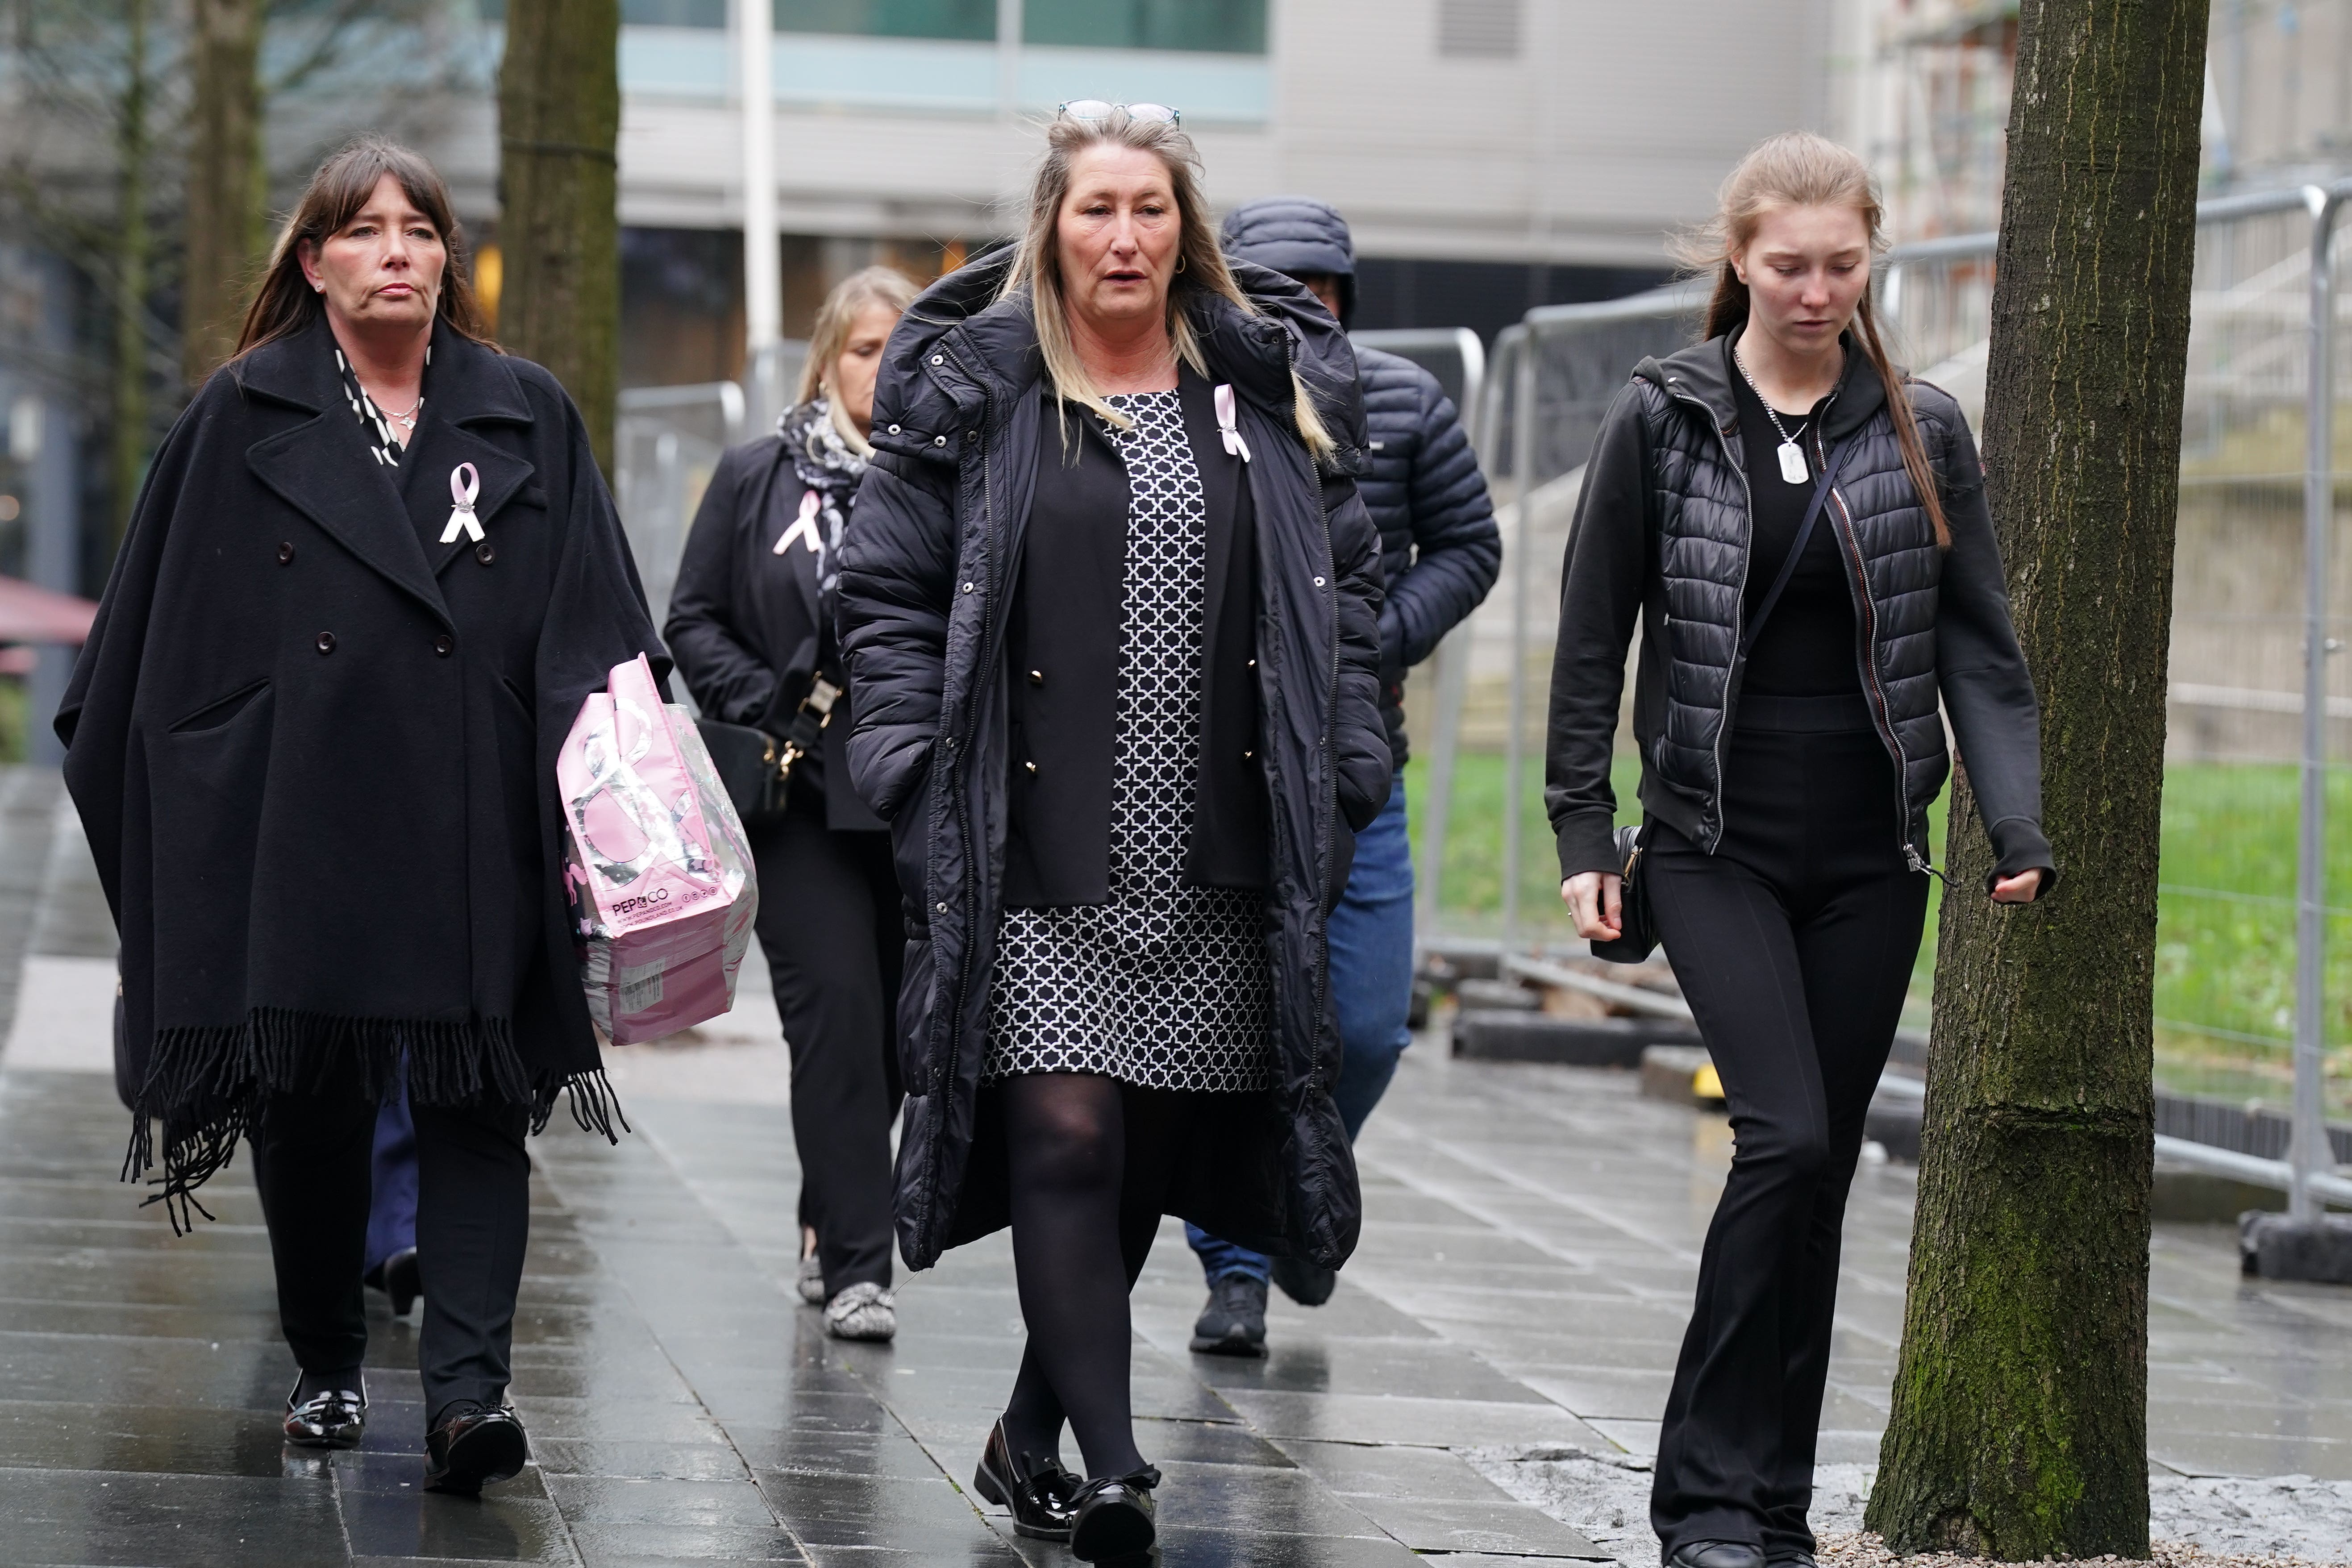 Cheryl Korbel, centre, mother of nine-year-old Olivia Pratt-Korbel, arrives with family members at Manchester Crown Court for the trial of Thomas Cashman, who is charged with murdering her daughter, who was shot in her home in Dovecot, Liverpool, on August 22 (Peter Byrne/PA)